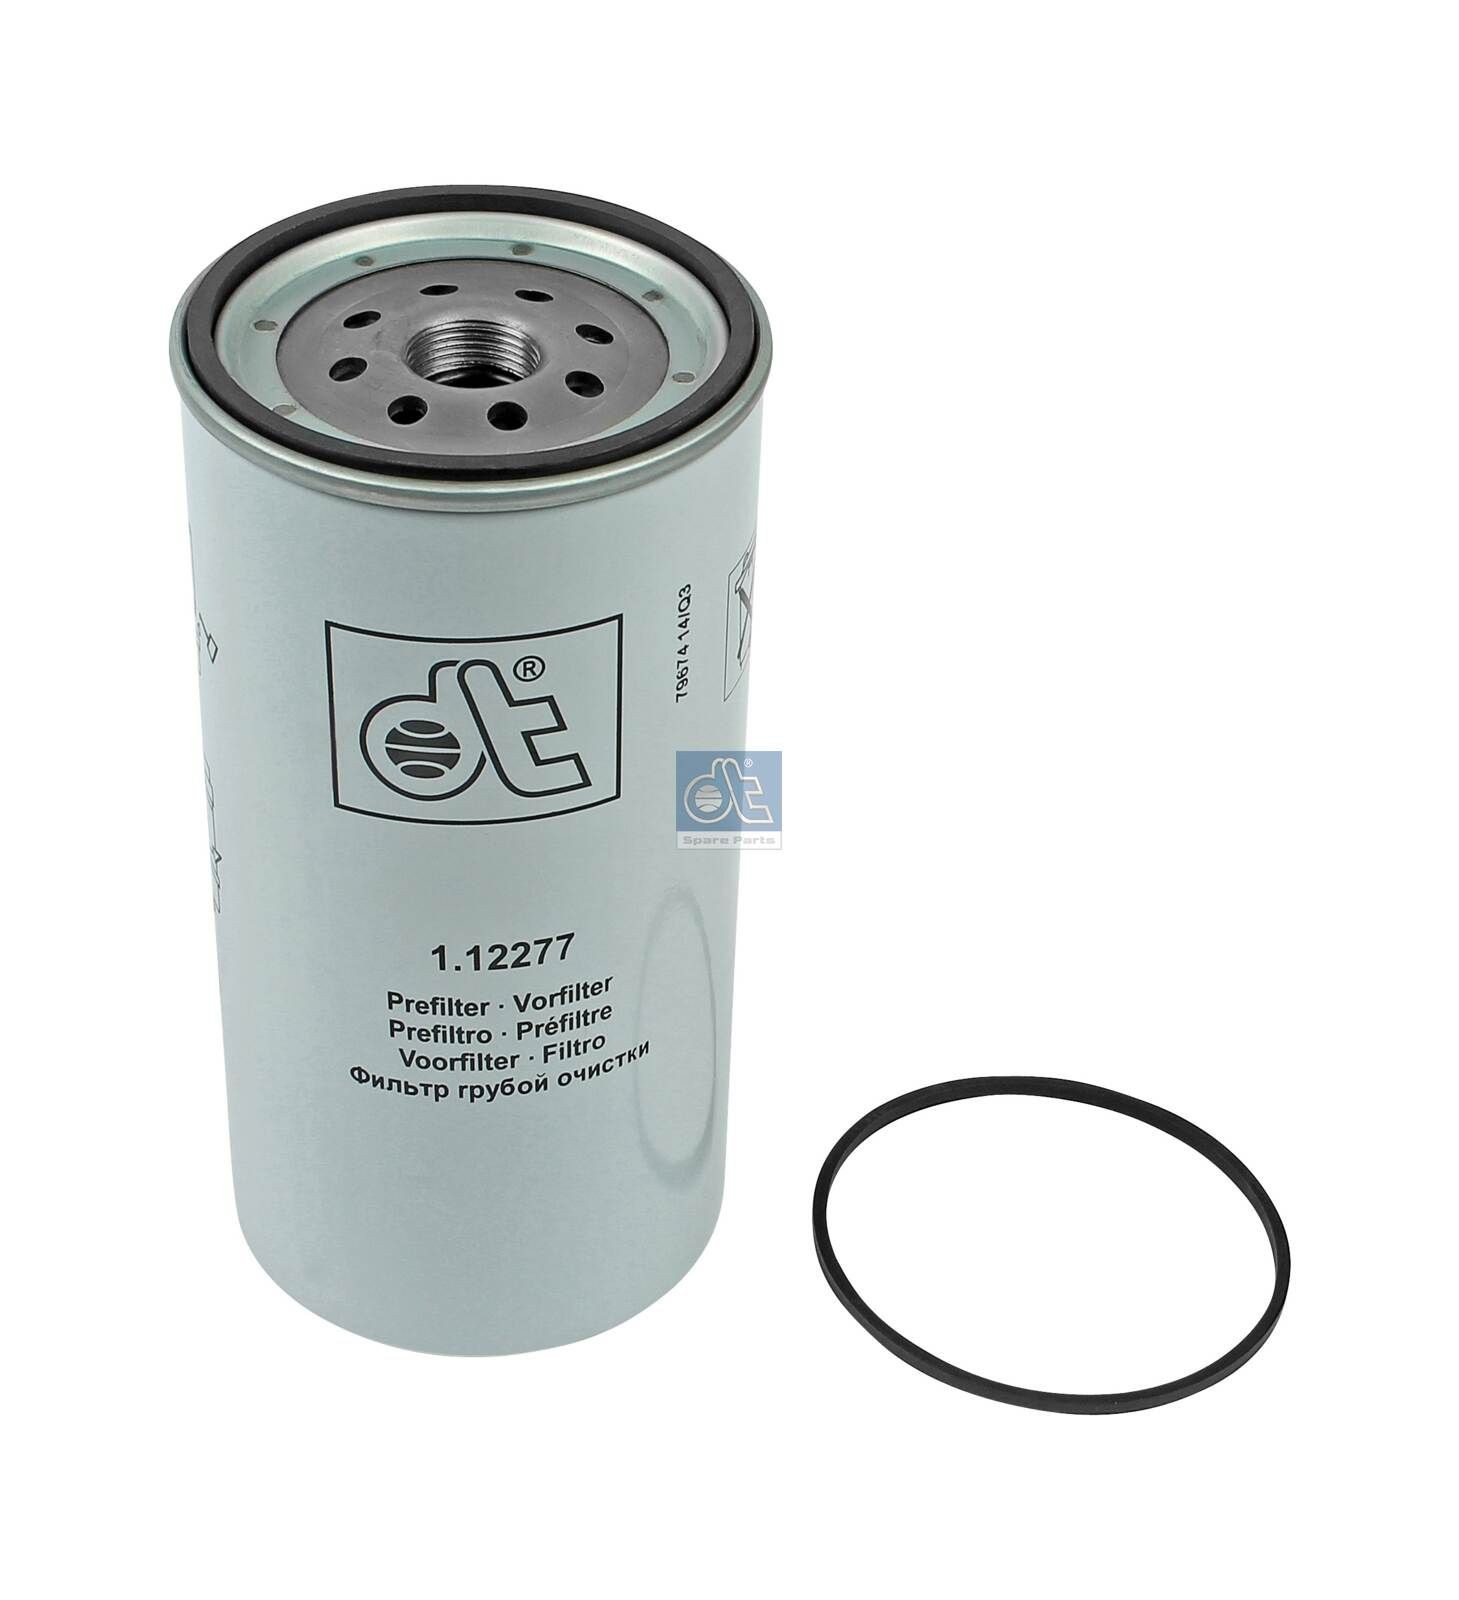 WK 1080/6 x DT Spare Parts 1.12277 Fuel filter 65.12501-5021